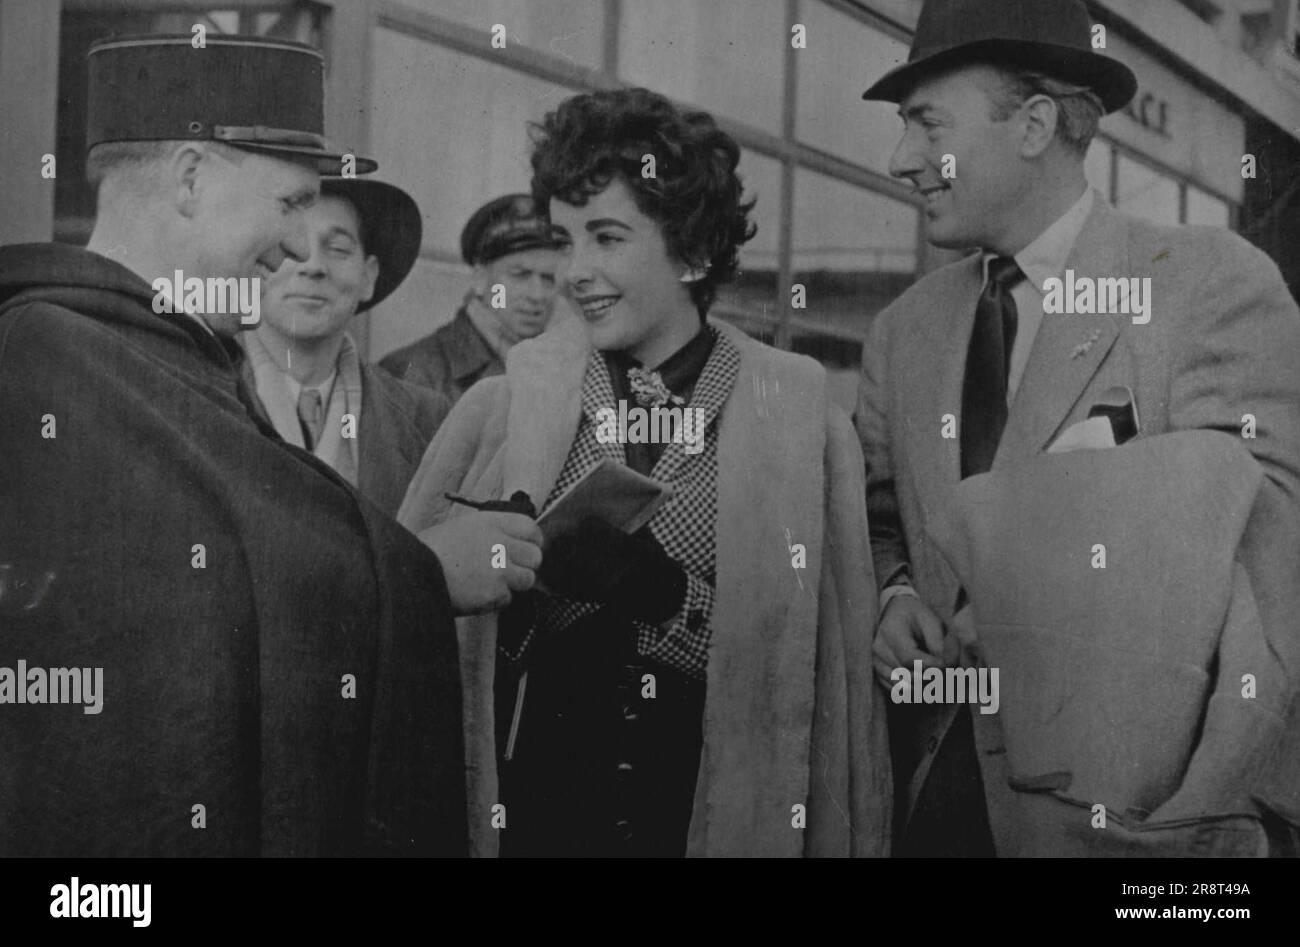 Elizabeth Taylor On Her Honeymoon - Elizabeth Taylor and Michael Wilding on their arrival at le bourget. They are giving their autographs to a policeman. Elizabeth Taylor and Michael Wilding who were married last Thursday called at Paris on their honeymoon. The new Mrs. Wilding is 19 and her husband 39. February 25, 1952. (Photo by Paul Popper, Paul Popper Ltd.). Stock Photo